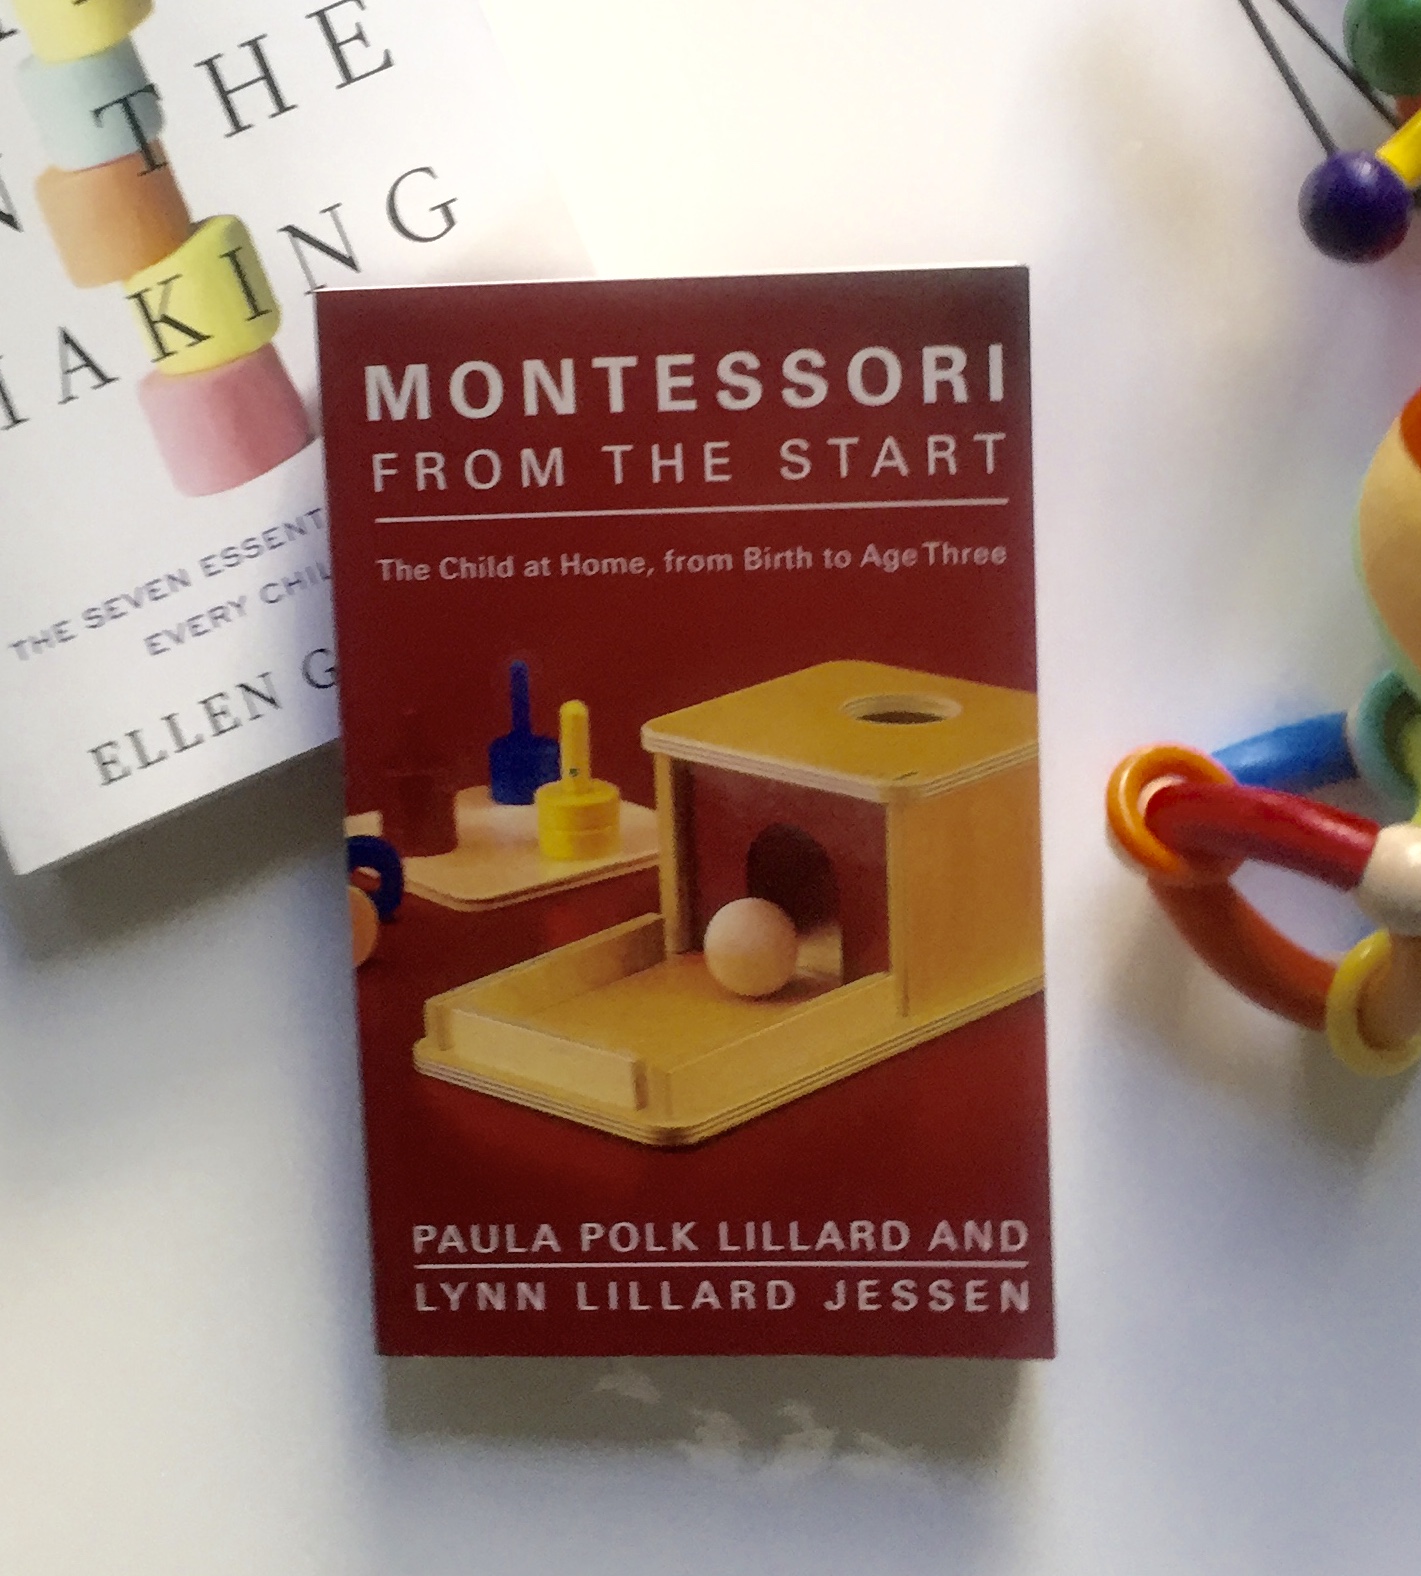 Montessori from the Start from Birth to Age Three The Child at Home 